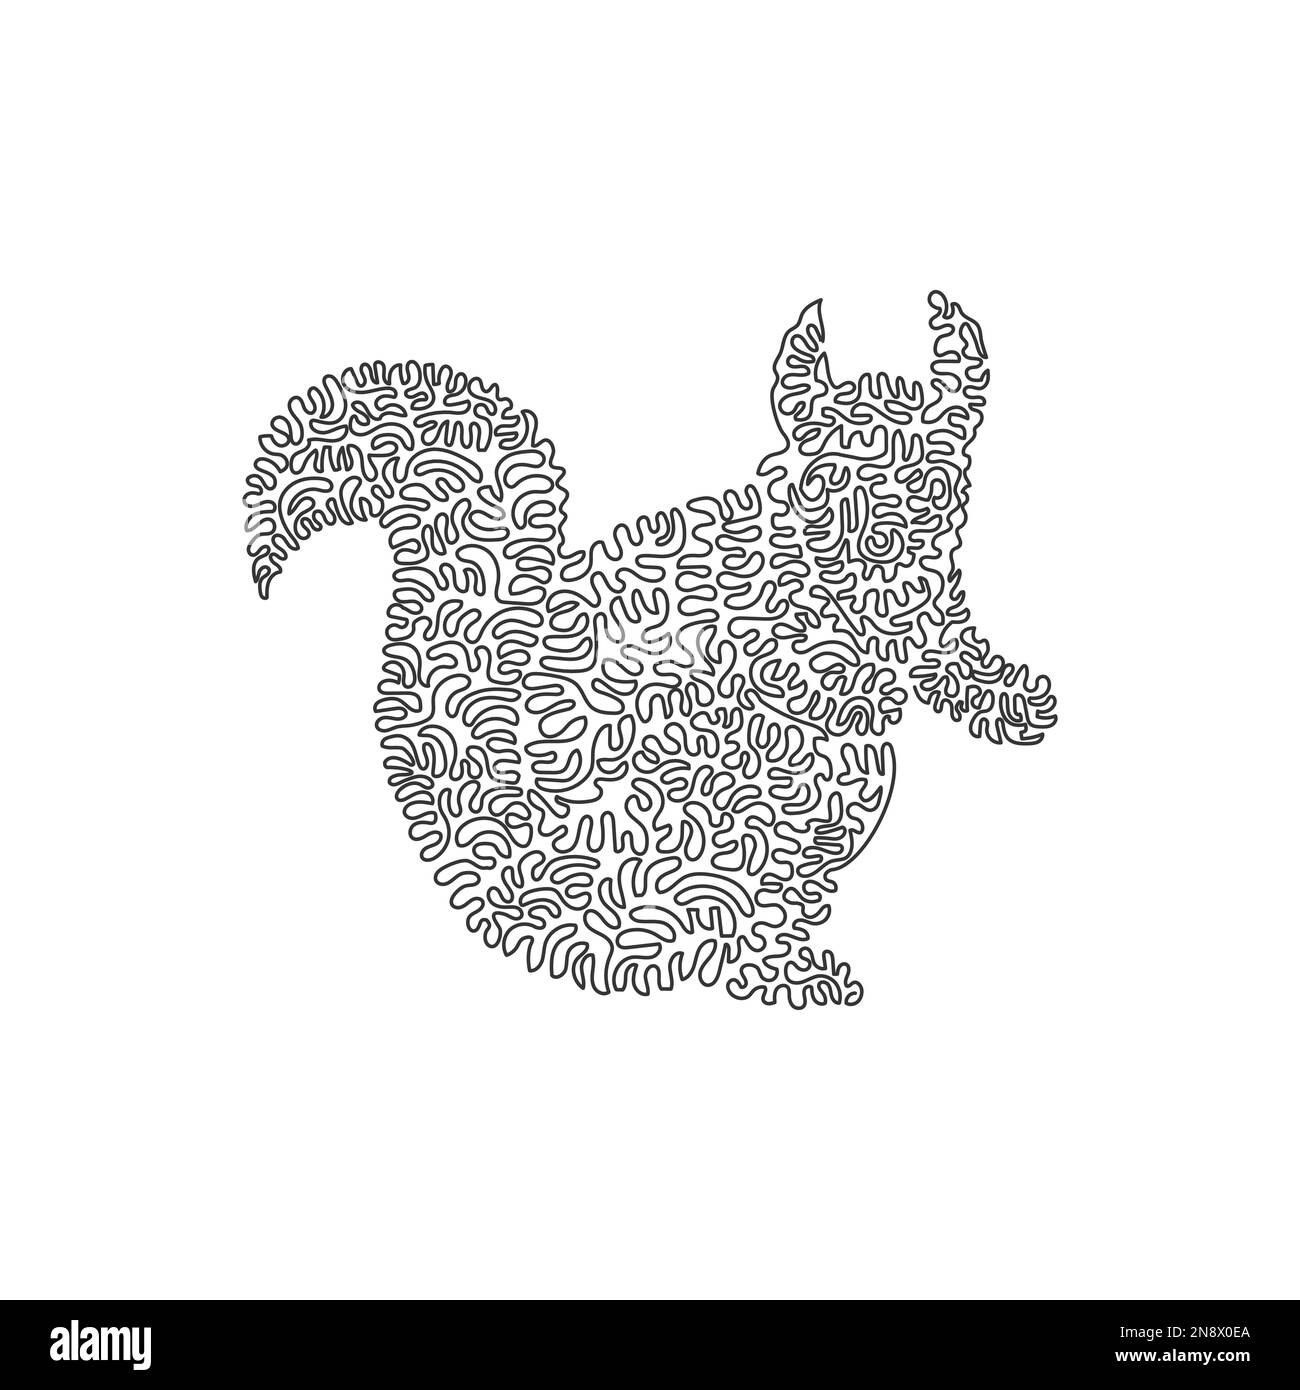 Single one line drawing of adorable squirrel abstract art. Continuous line drawing design vector illustration of squirrels watching out for predator Stock Vector